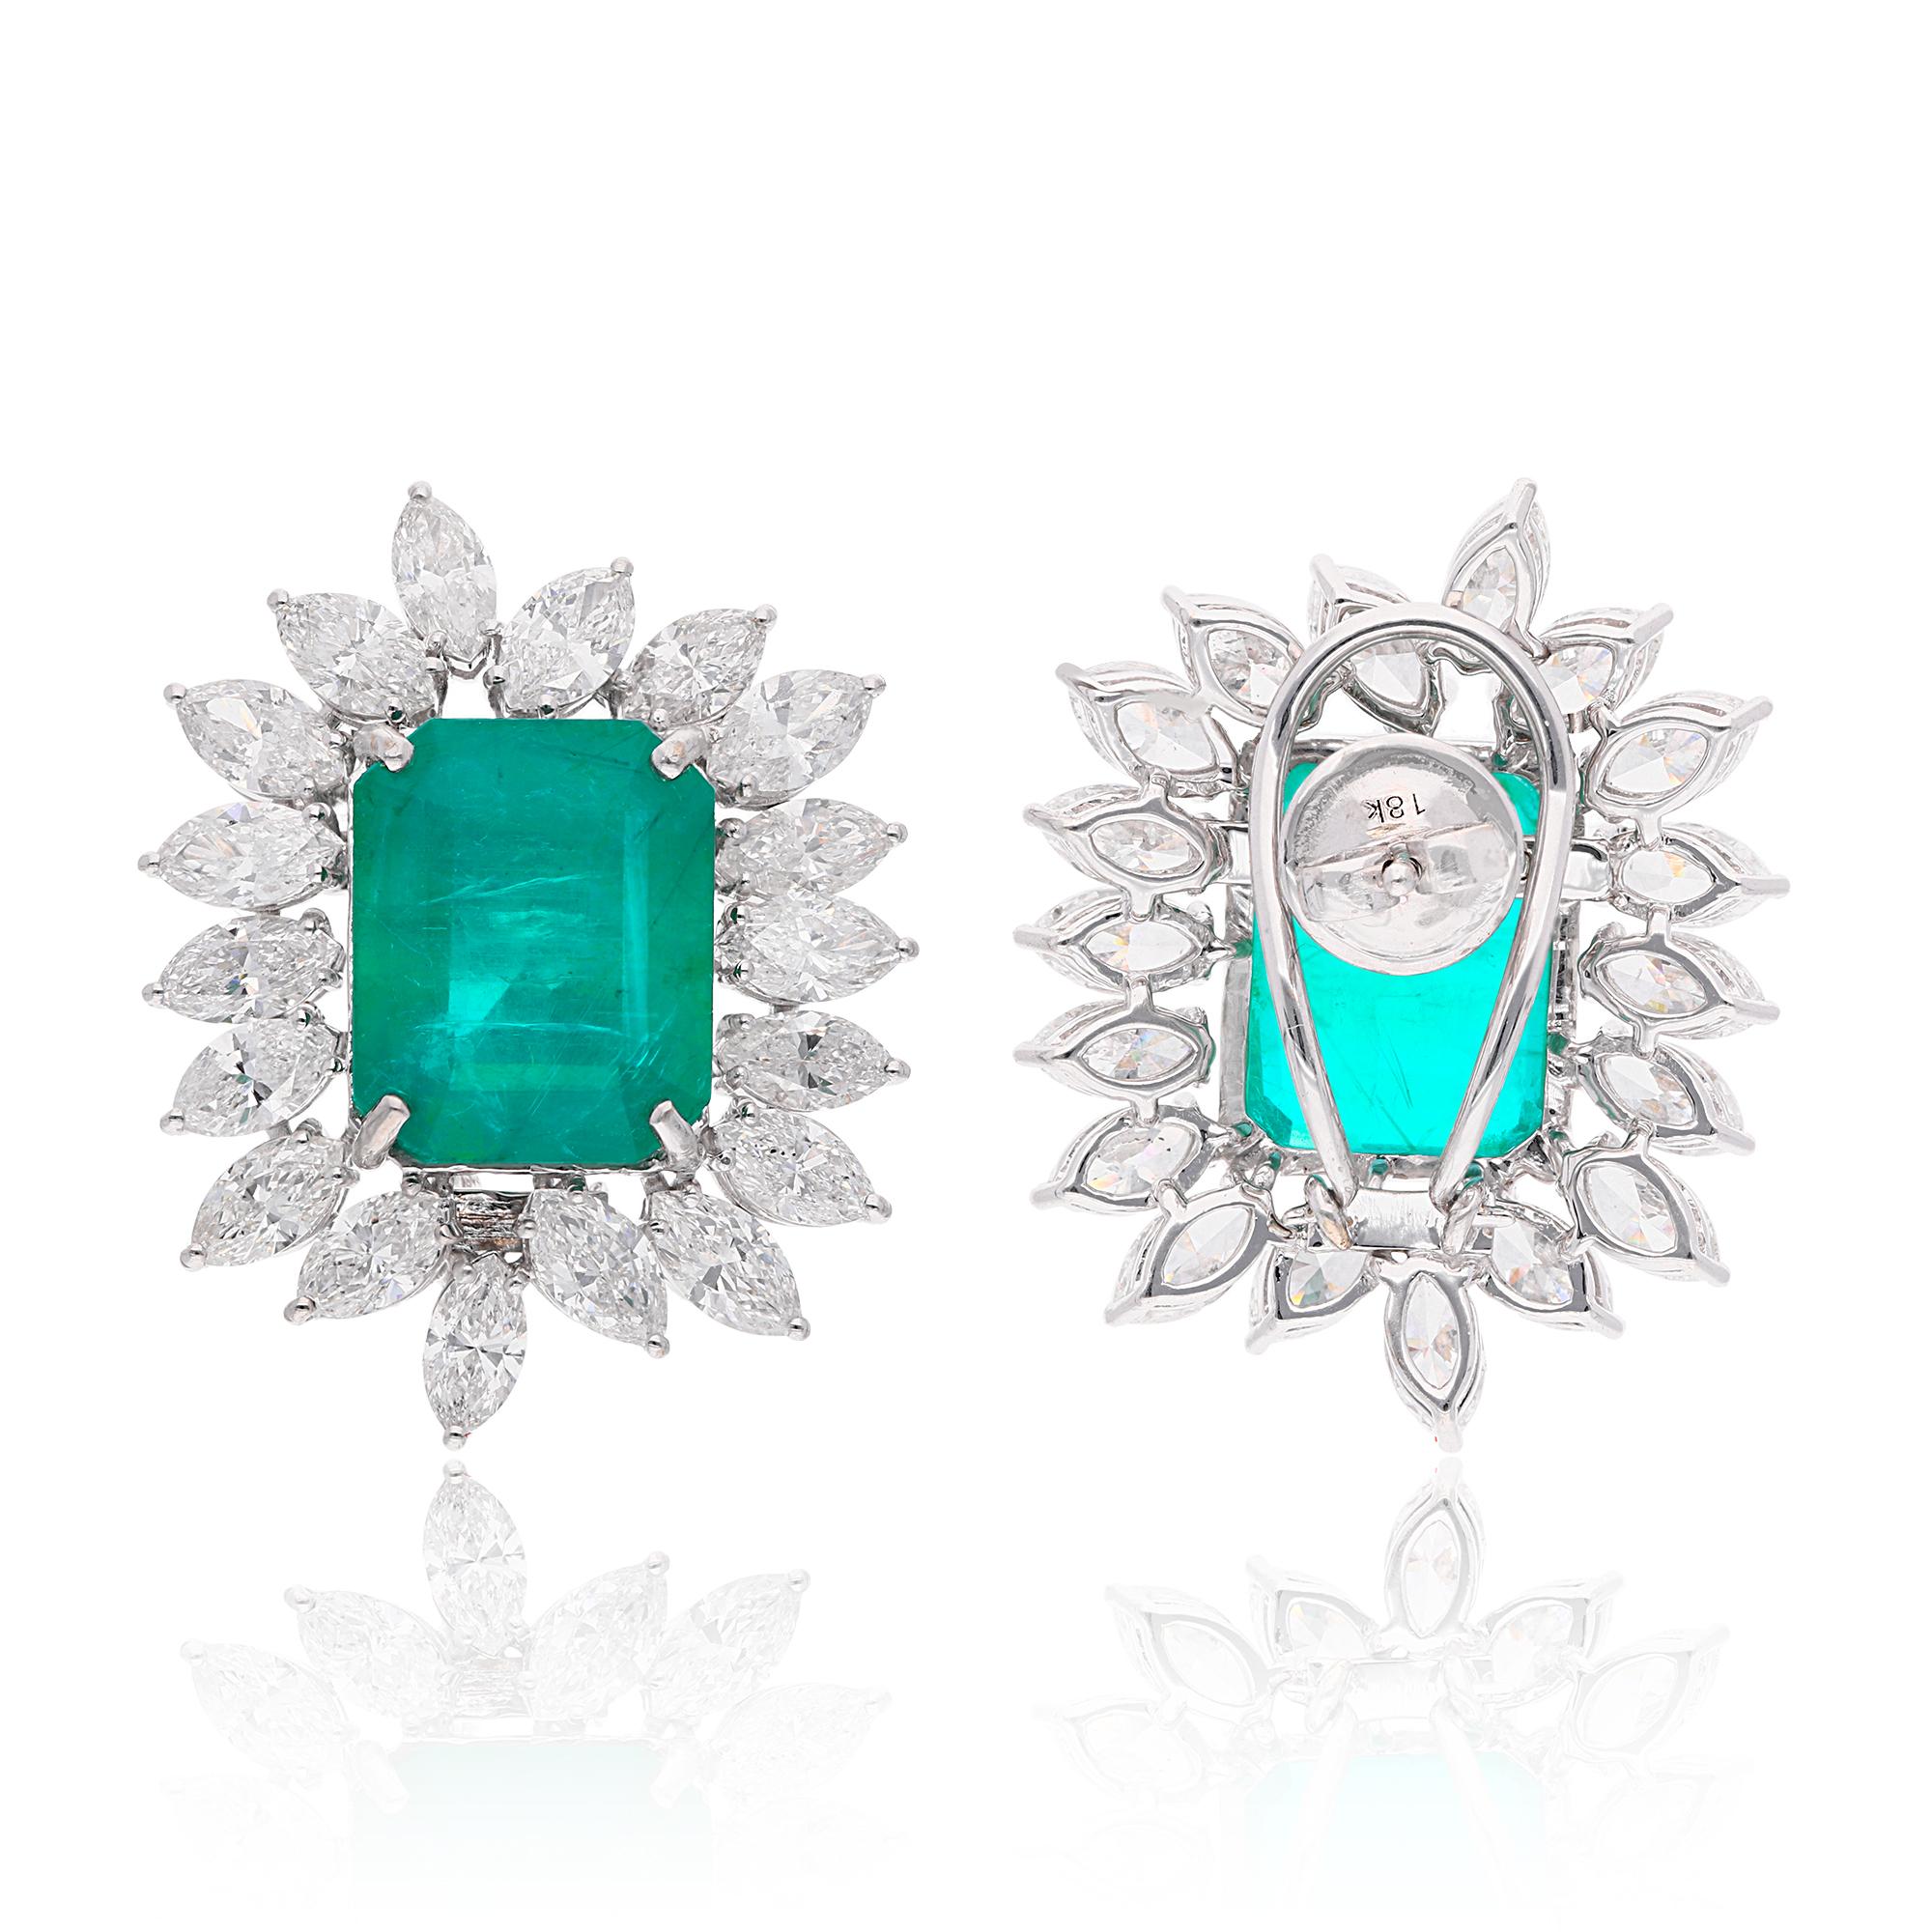 Item Code :- SEE-12602A
Gross Wt. :- 15.63 gm
18k White Gold Wt. :- 11.27 gm
Diamond Wt. :- 7.71 Ct. ( AVERAGE DIAMOND CLARITY SI1-SI2 & COLOR H-I )
Emerald Wt. :- 14.09 Ct.
Earrings Size :- 28 mm approx.

✦ Sizing
.....................
We can